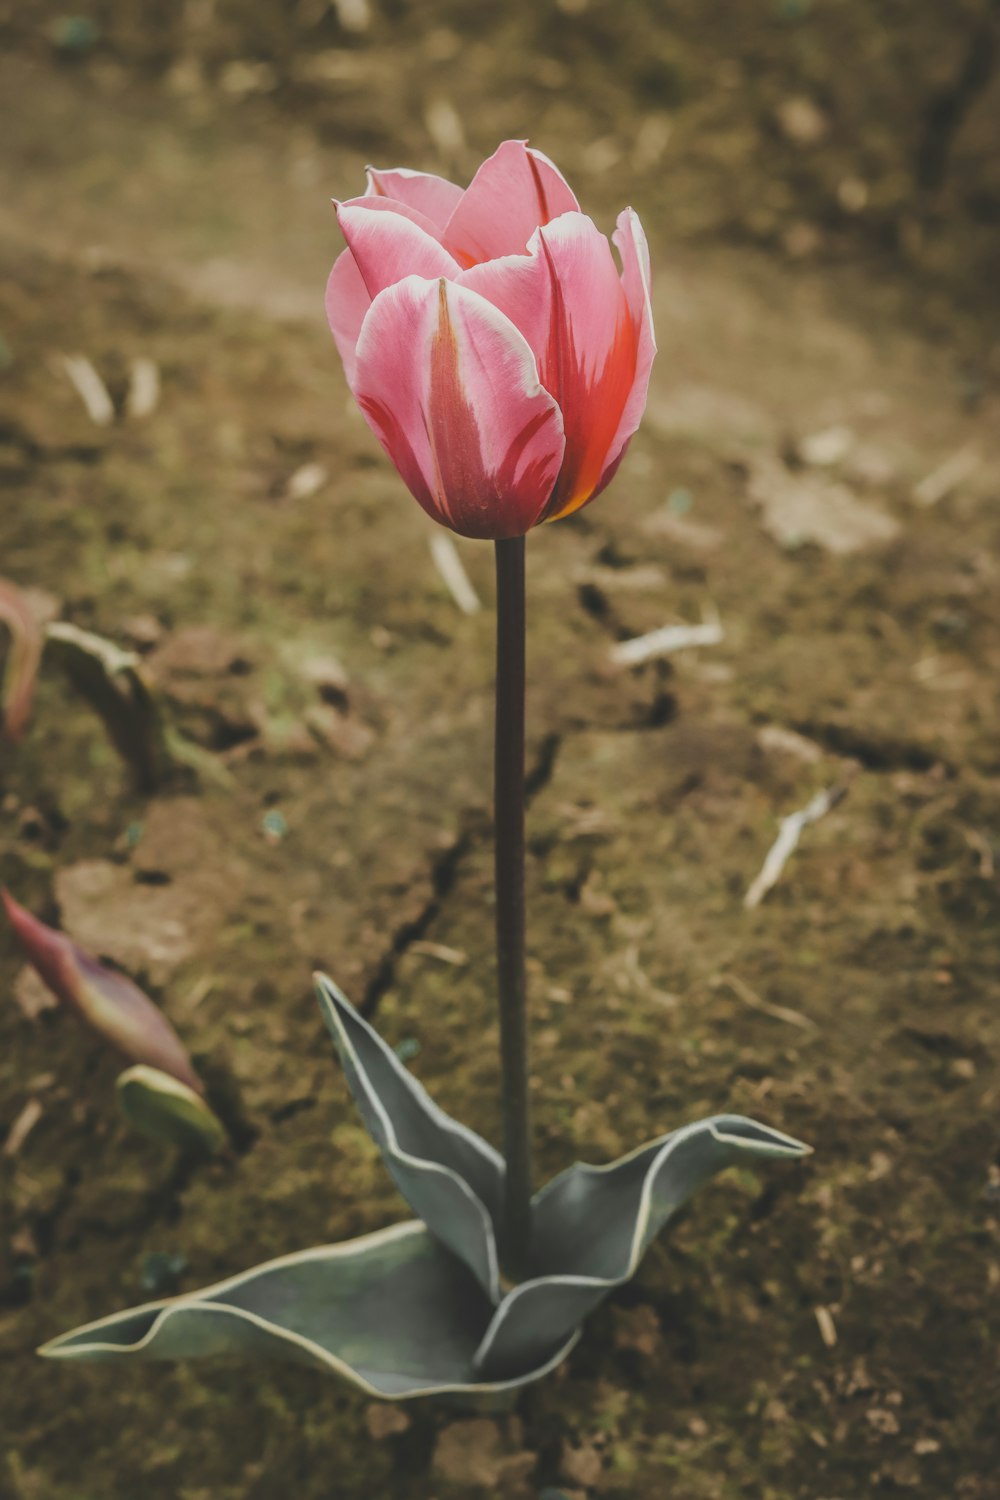 a single pink tulip in the middle of a field